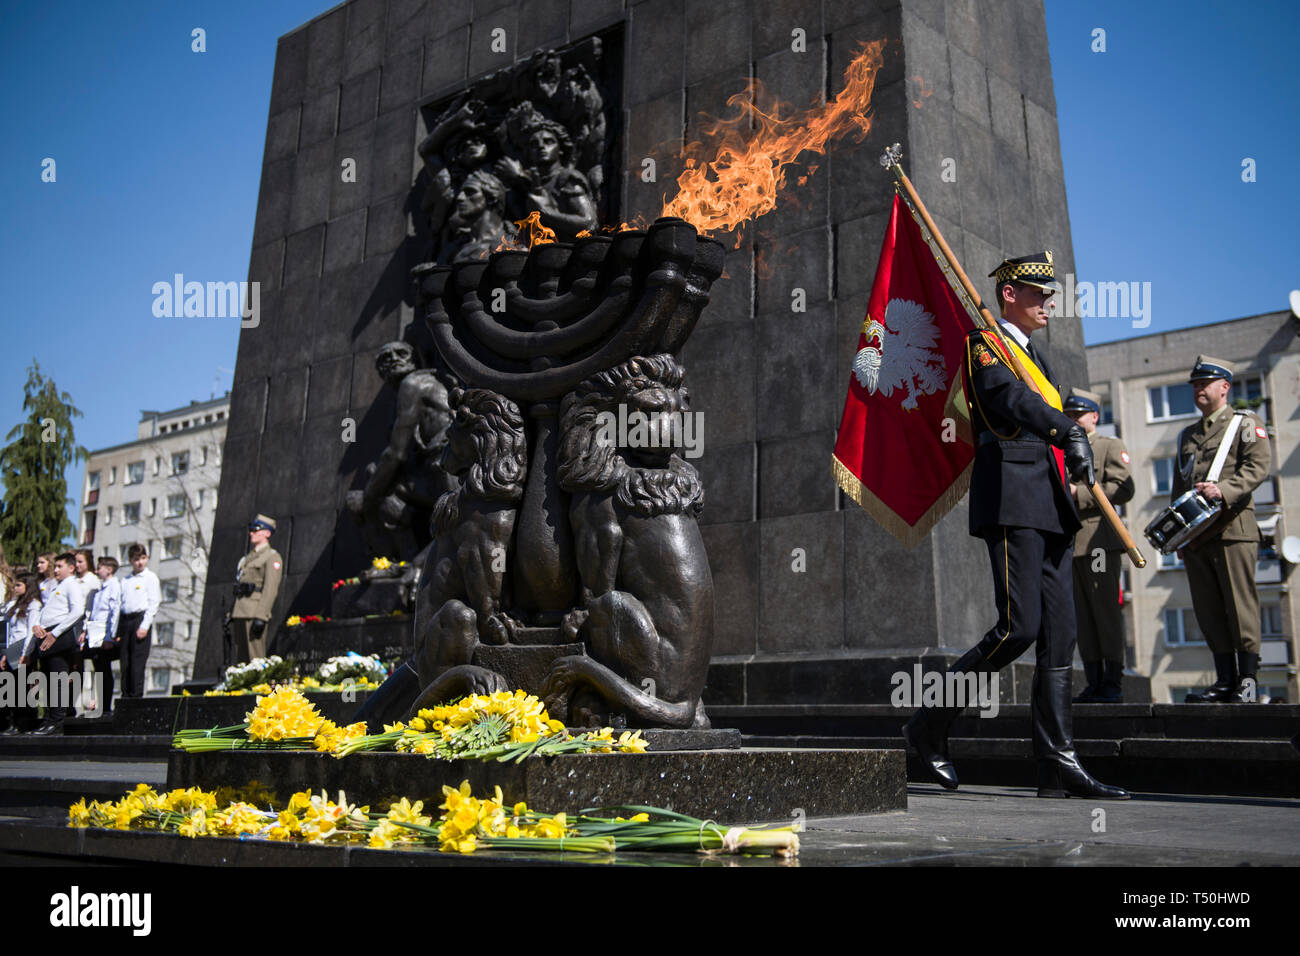 A view of The monument of Warsaw Heroes of the Ghetto during a ceremony to mark the 76th anniversary of the outbreak of the Warsaw Ghetto Uprising. As part of the ceremony alarm sirens were heard throughout the city to remember those who were murdered in the ghetto in 1943. The Warsaw ghetto uprising was a violent revolt that occurred from April 19 to May 16, 1943, during World War II. Residents of the Jewish ghetto in Nazi-occupied Warsaw, Poland, staged the armed revolt to prevent deportations to Nazi-run extermination camps. Stock Photo